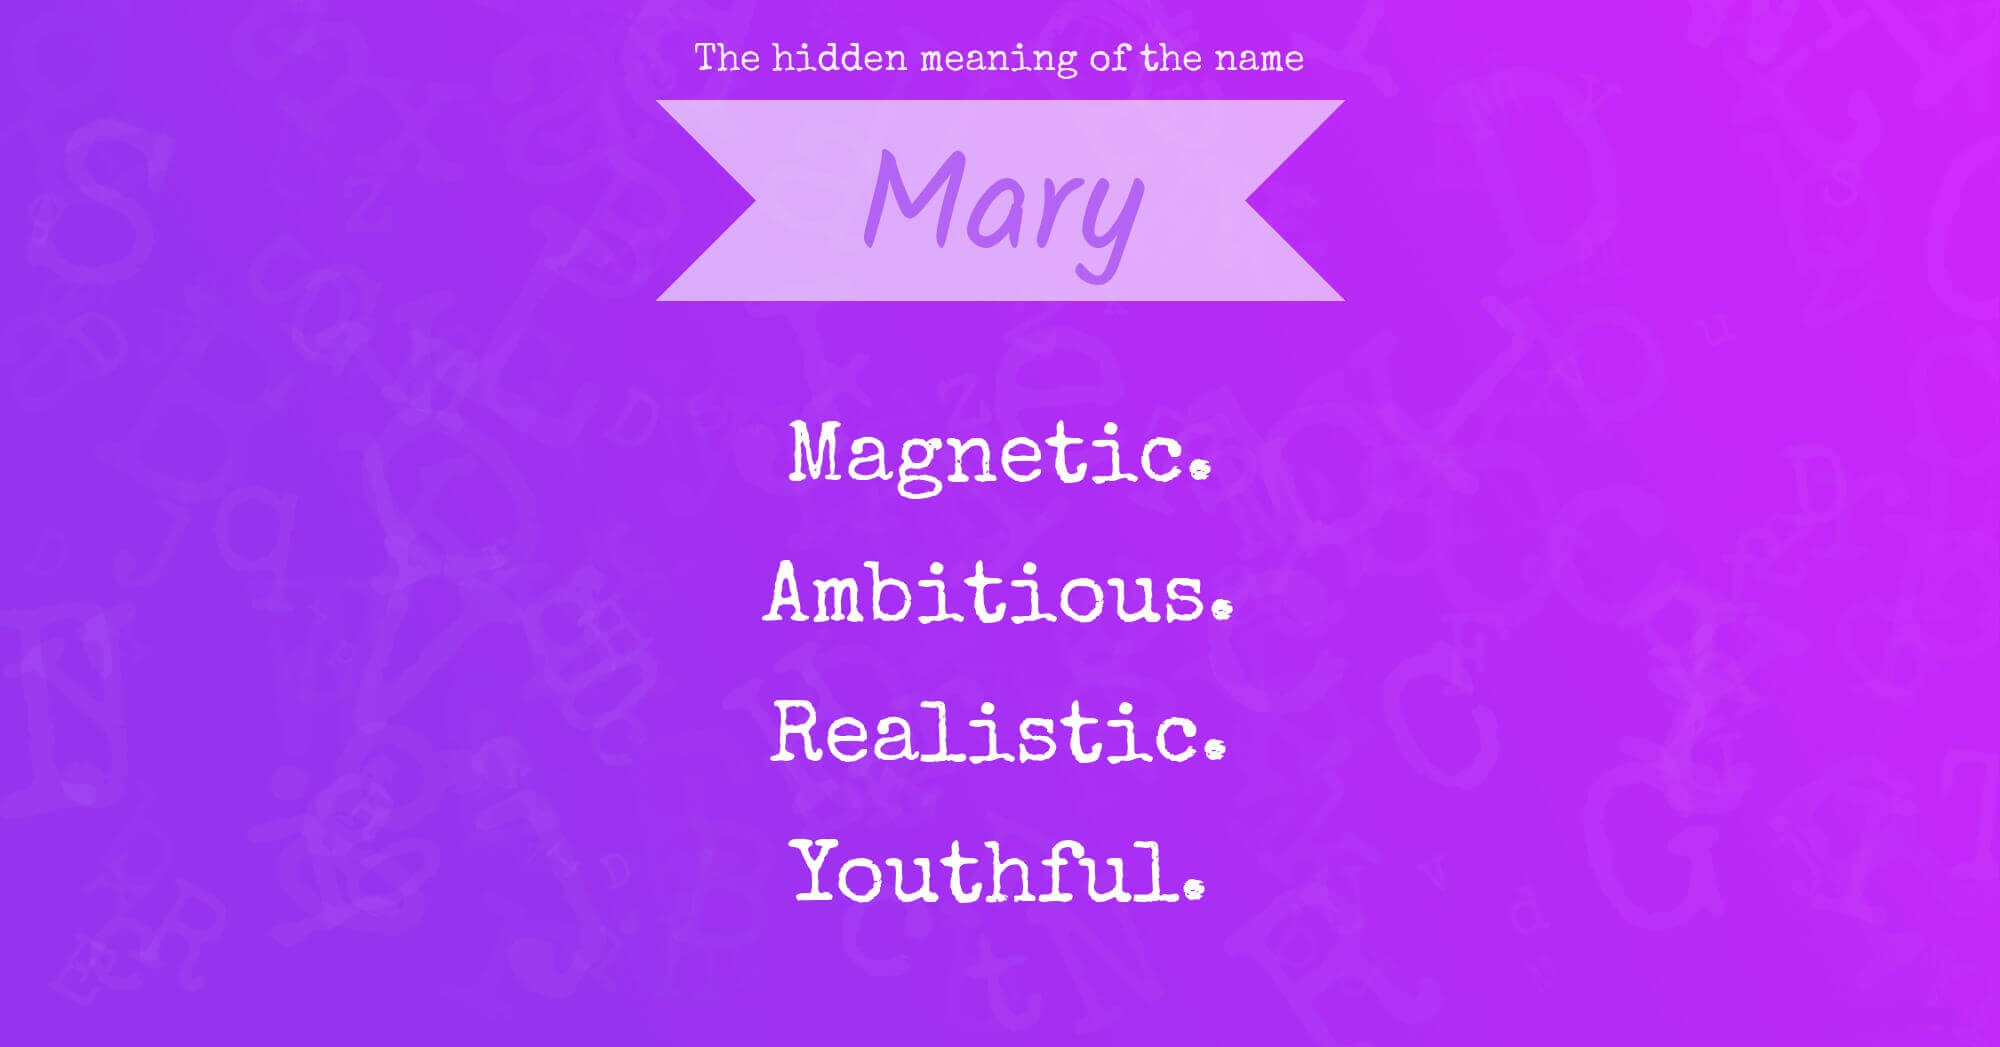 The Hidden Meaning of The Name Mary